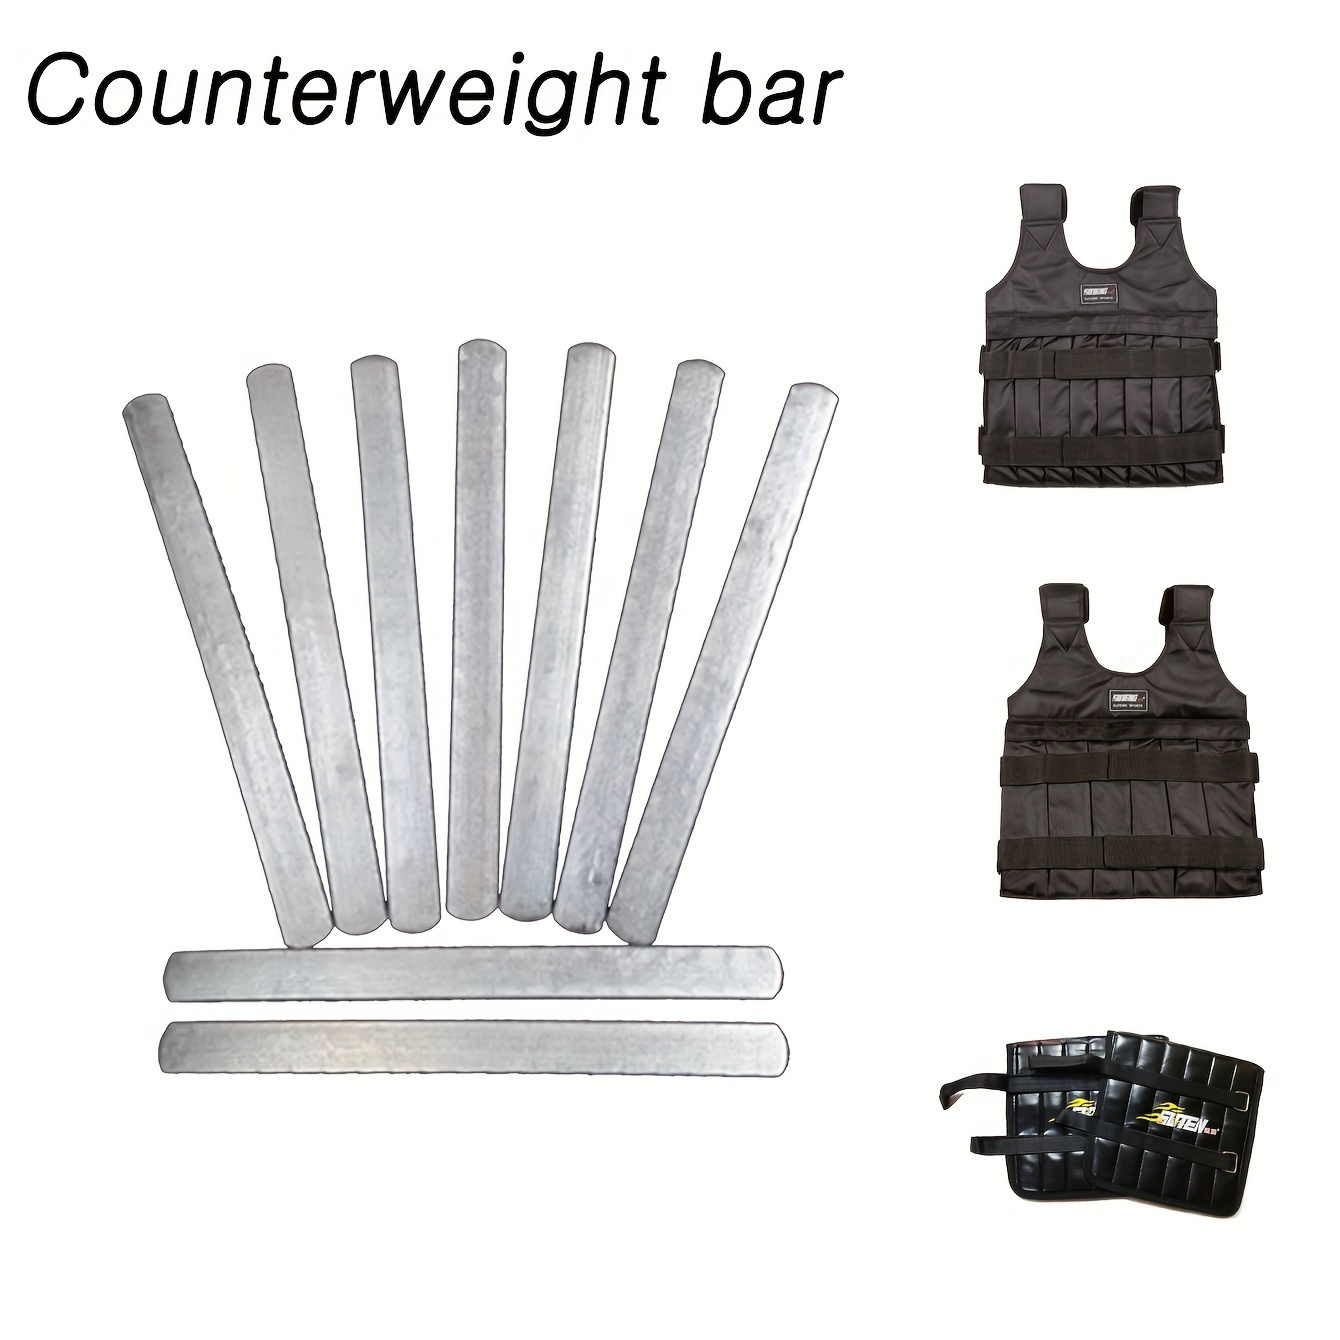 

1pc/2pcs Individual Weight 0.2kg, Electroplating Round Edge Stainless Steel Plate, Adjustable Weighted Plate For Weight Bearing Vest And Leggings Sandbag